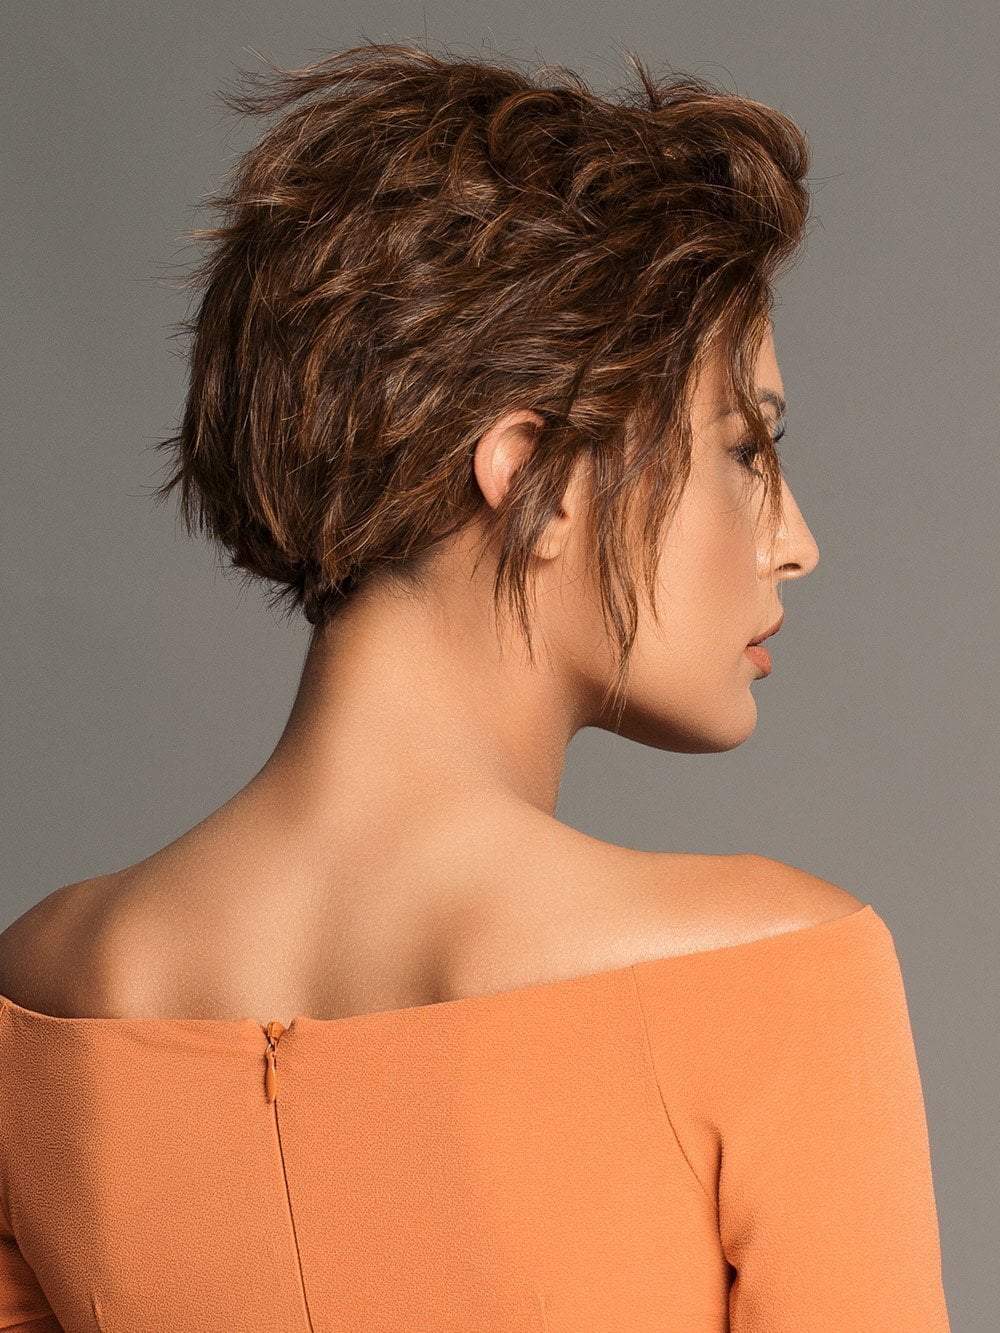 IMPULSE by ELLEN WILLE in NOUGAT ROOTED | Medium-Ash Brown Base, Blended With Medium Neutral Brown, Ash Blonde Highlights & Medium-Neutral Brown Root (This piece has been styled)